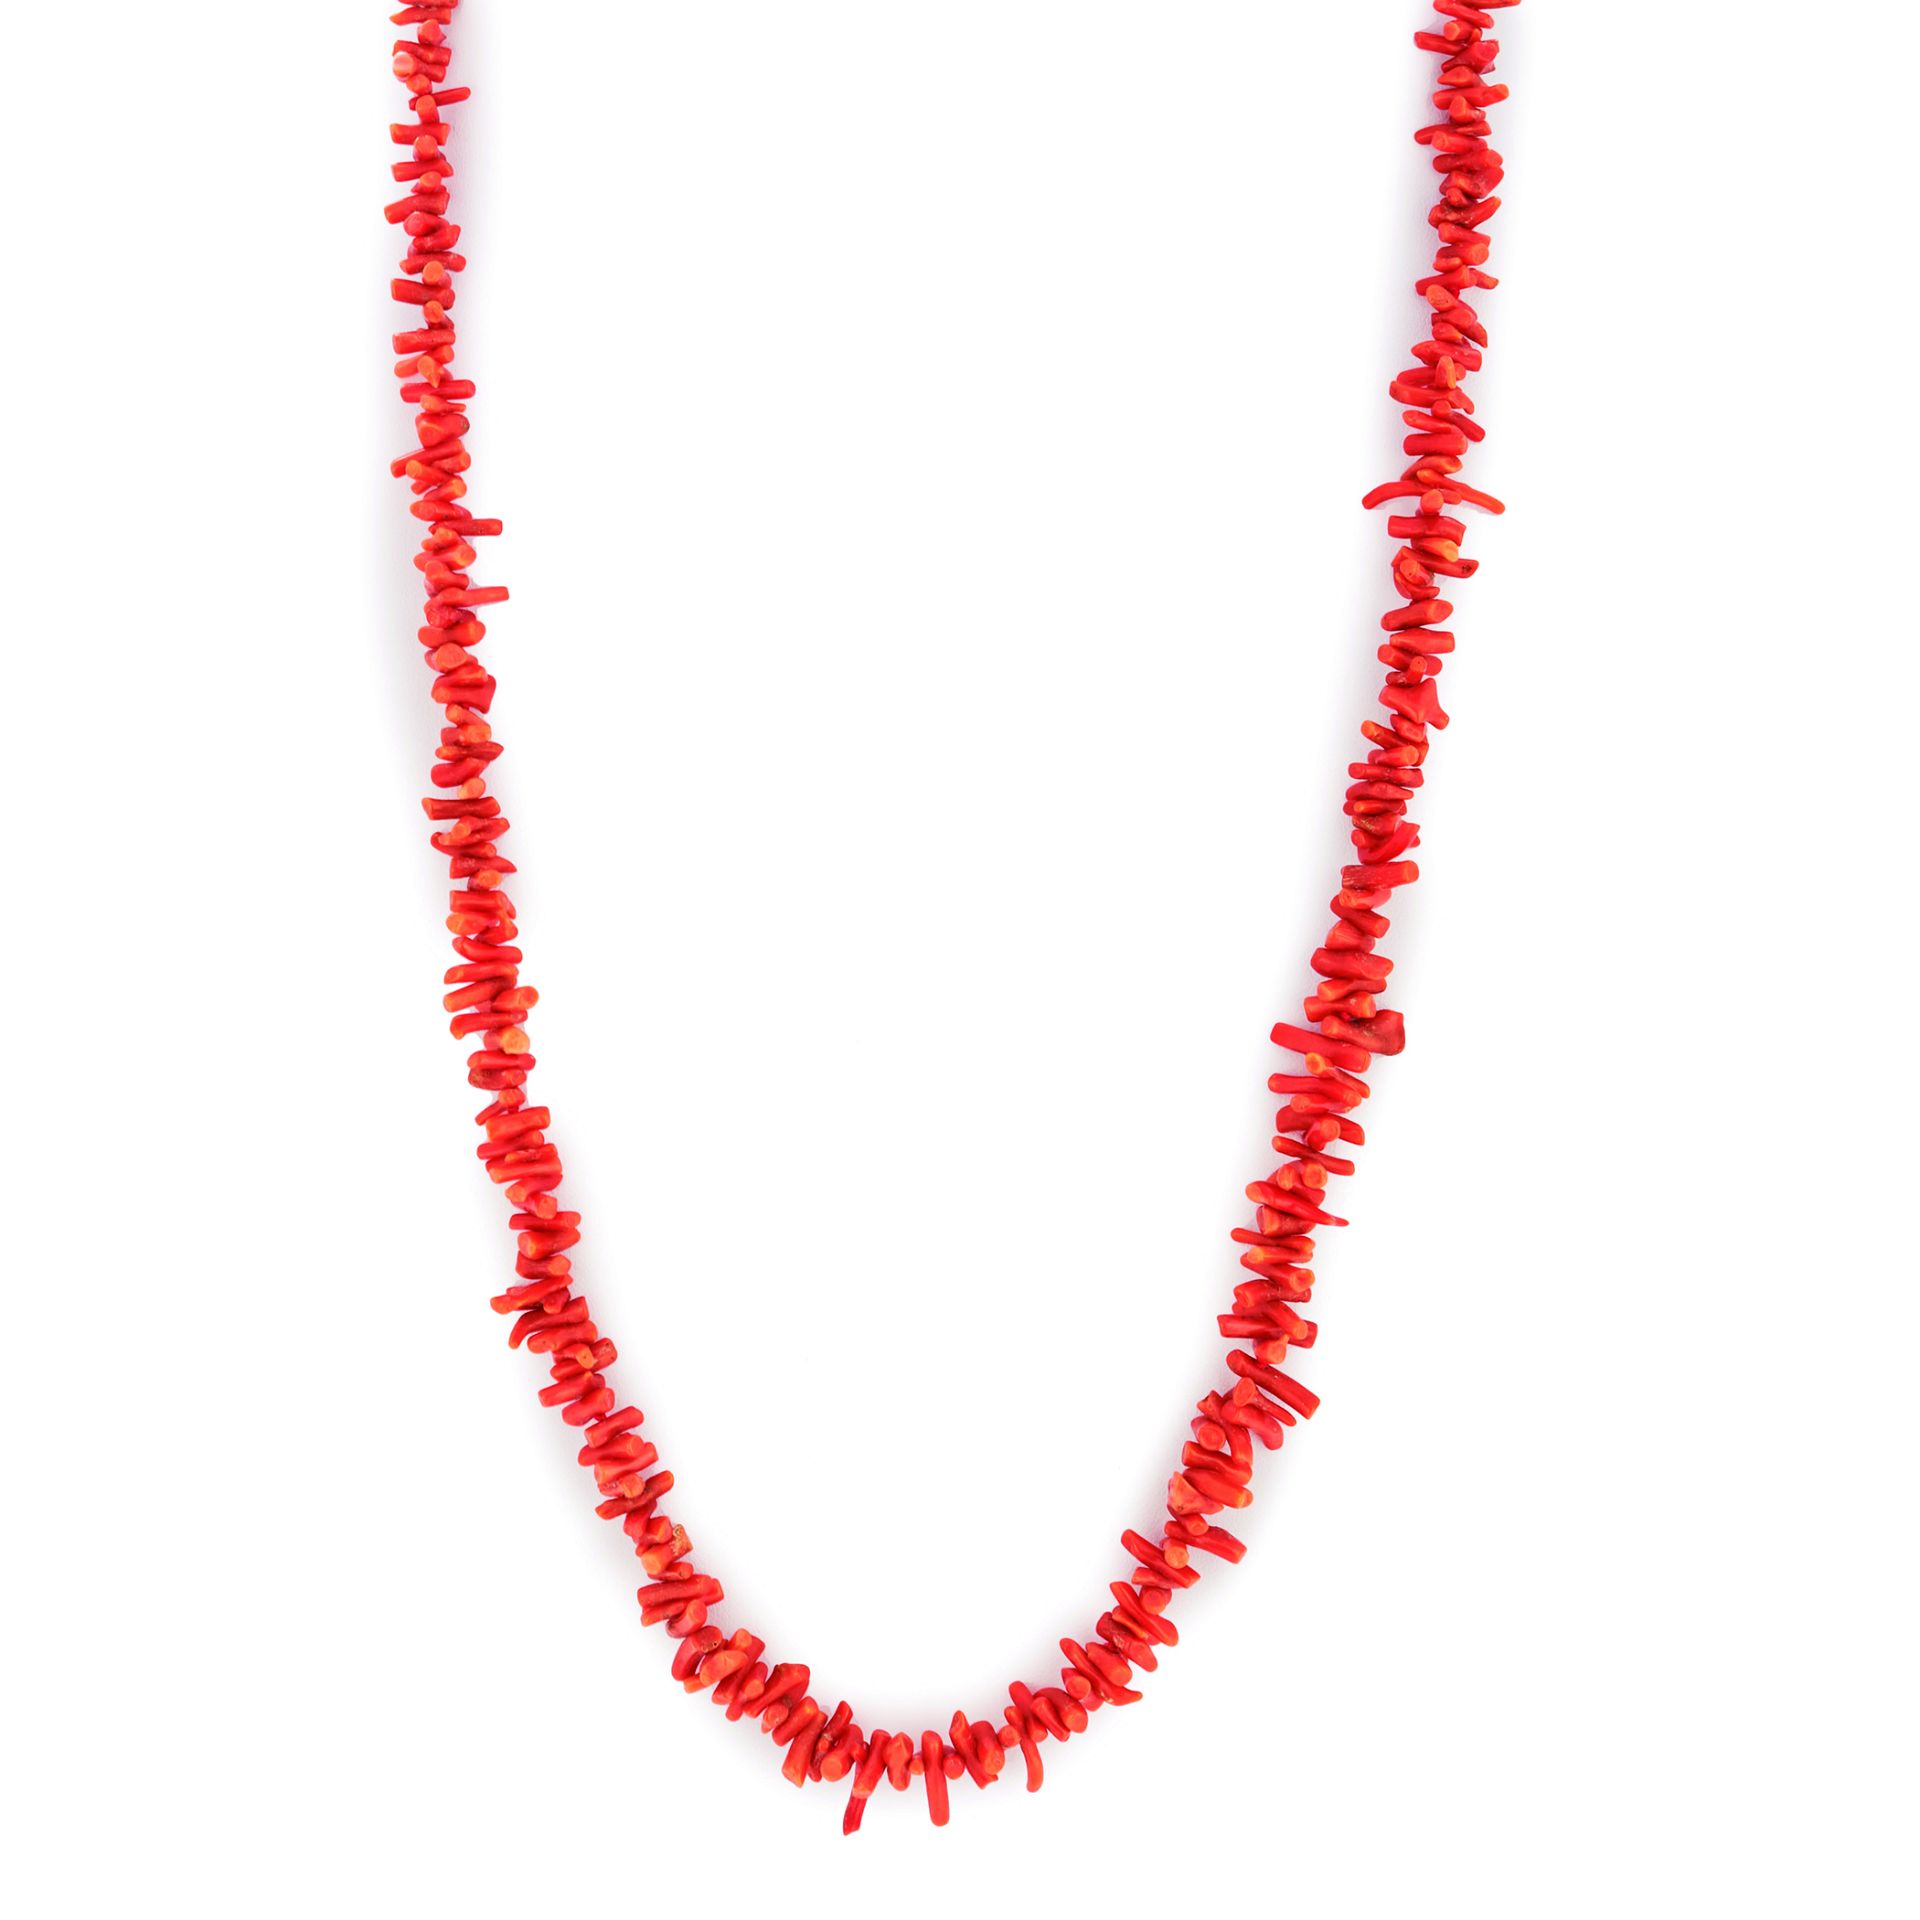 Coral root necklace.